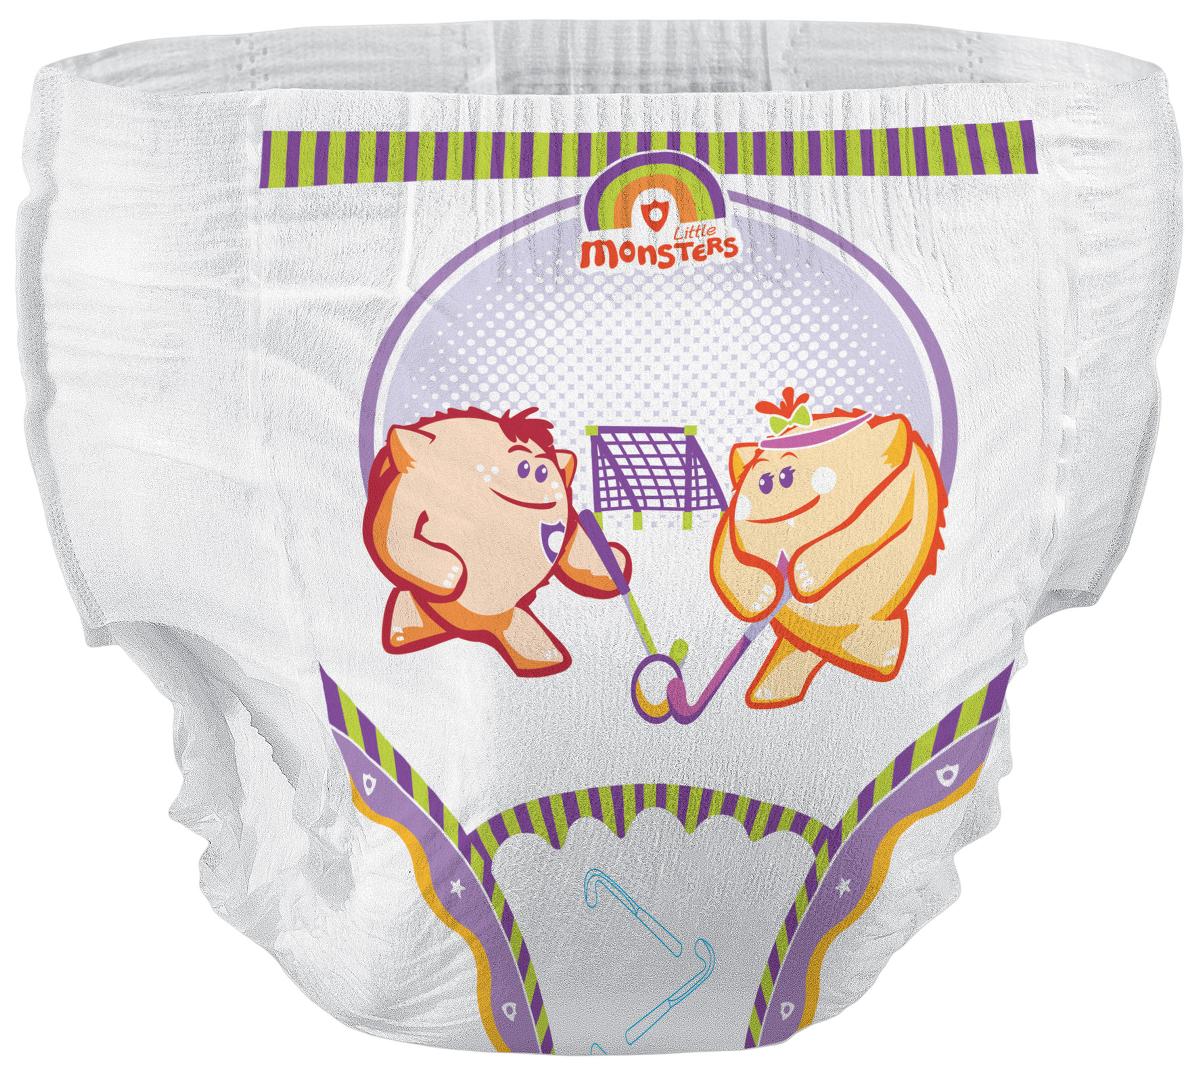 Toddler Training Pants - 4T-5T (38+ lbs)